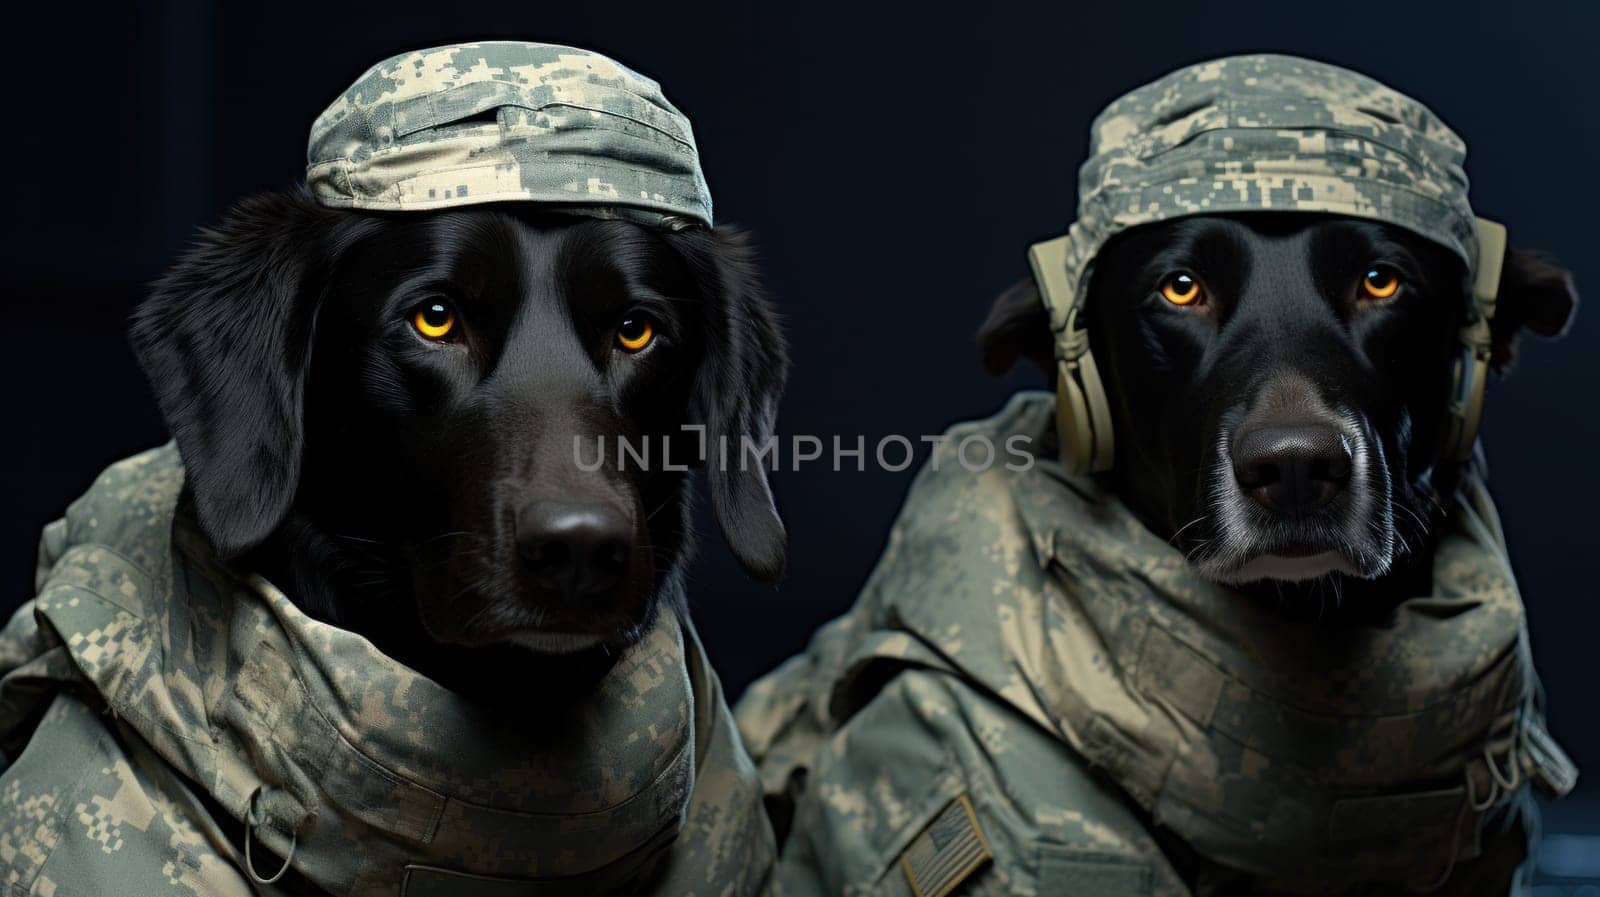 Two dogs in military uniforms with yellow eyes and ears